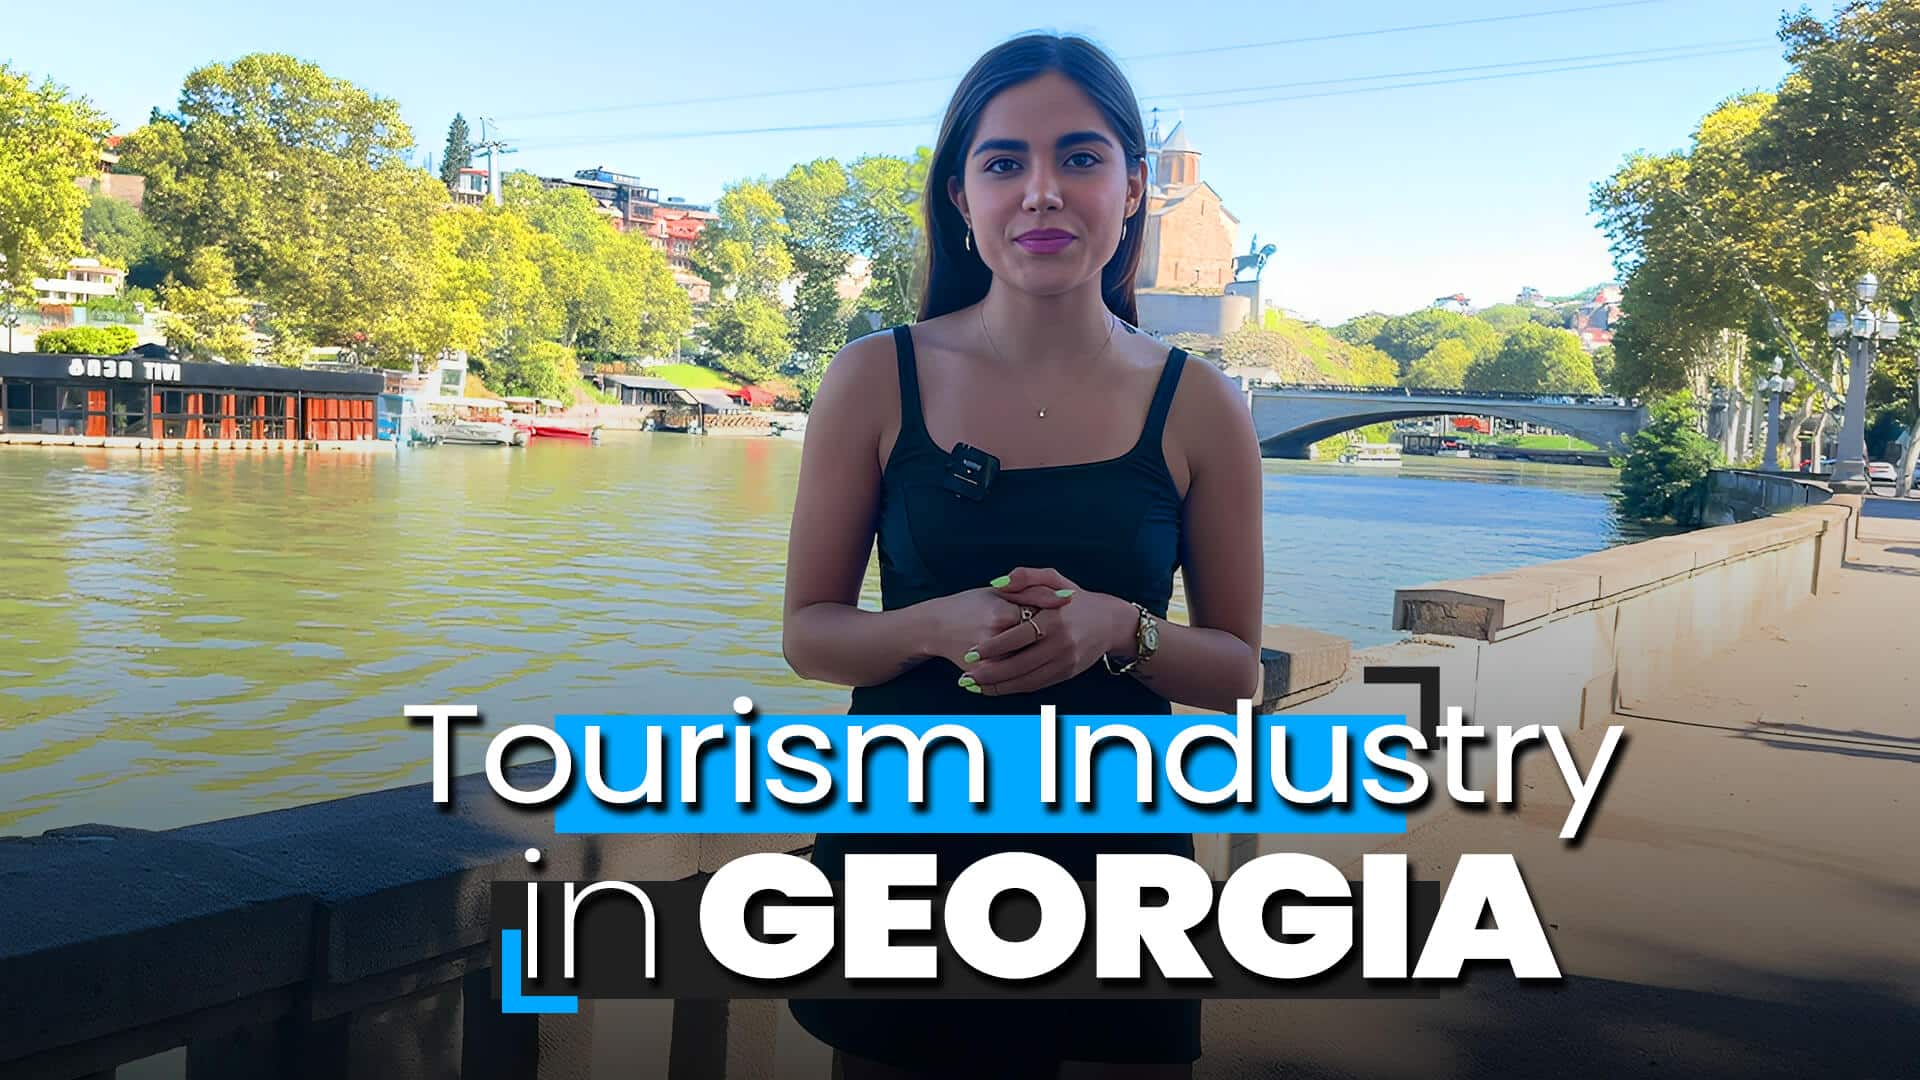 Tourism Industry in Georgia